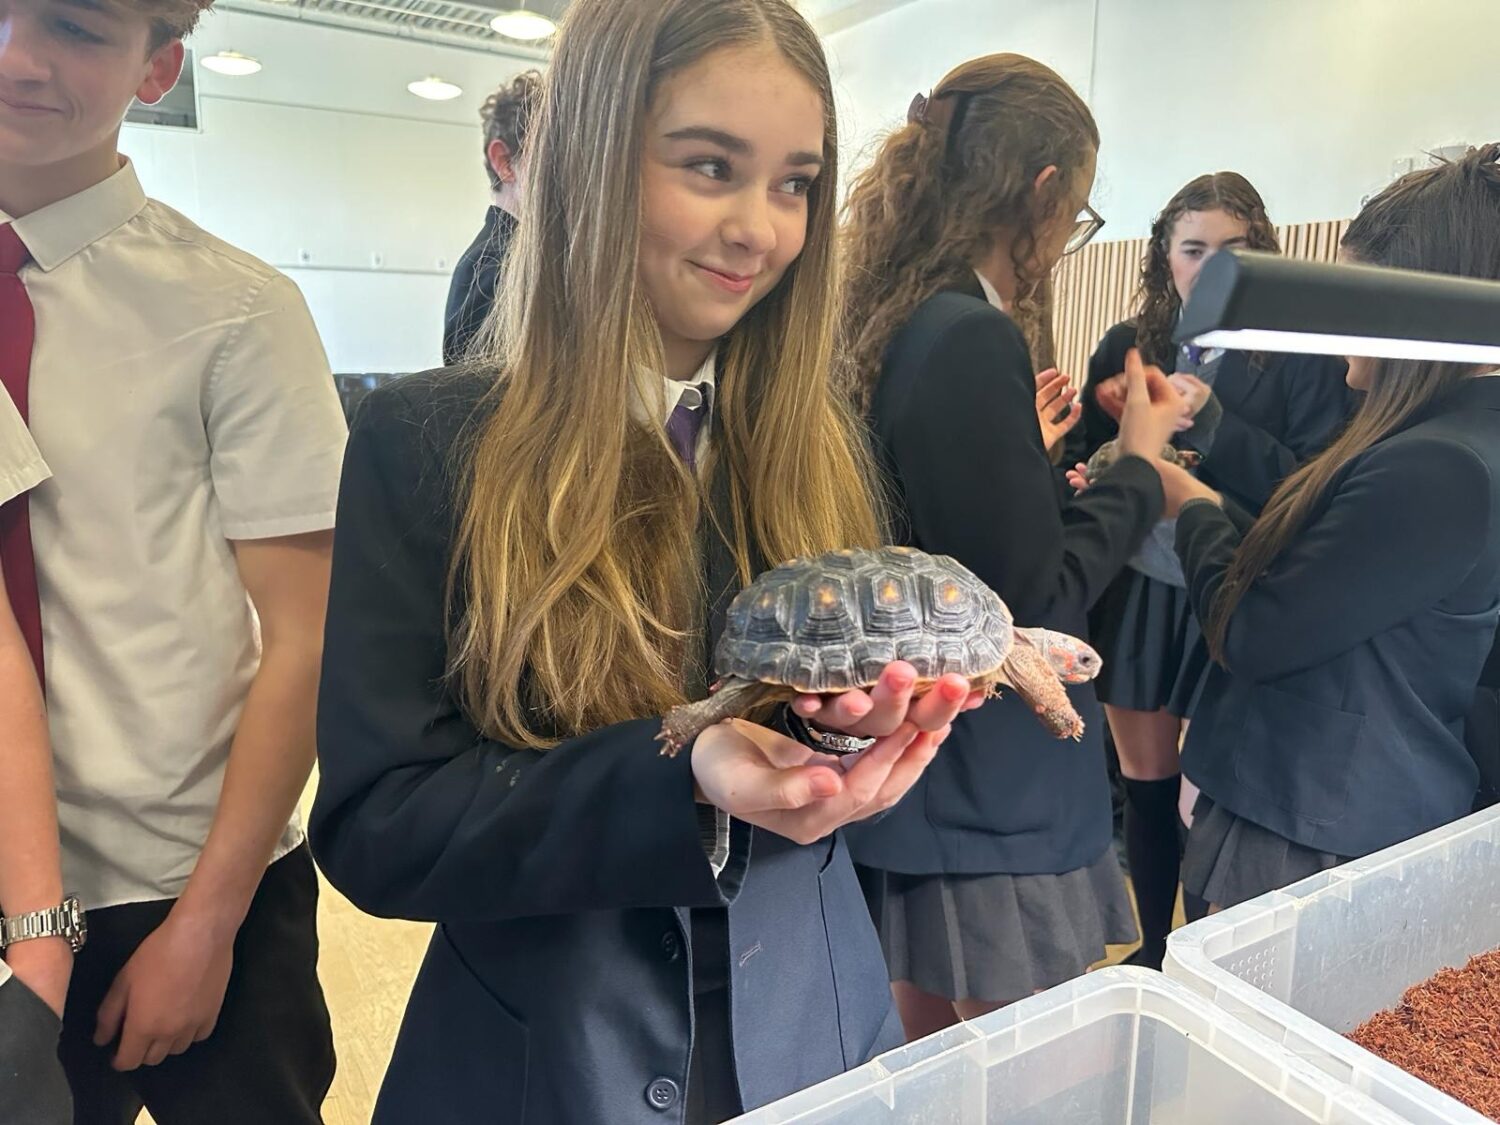 Student holding tortoise in a crowd of people